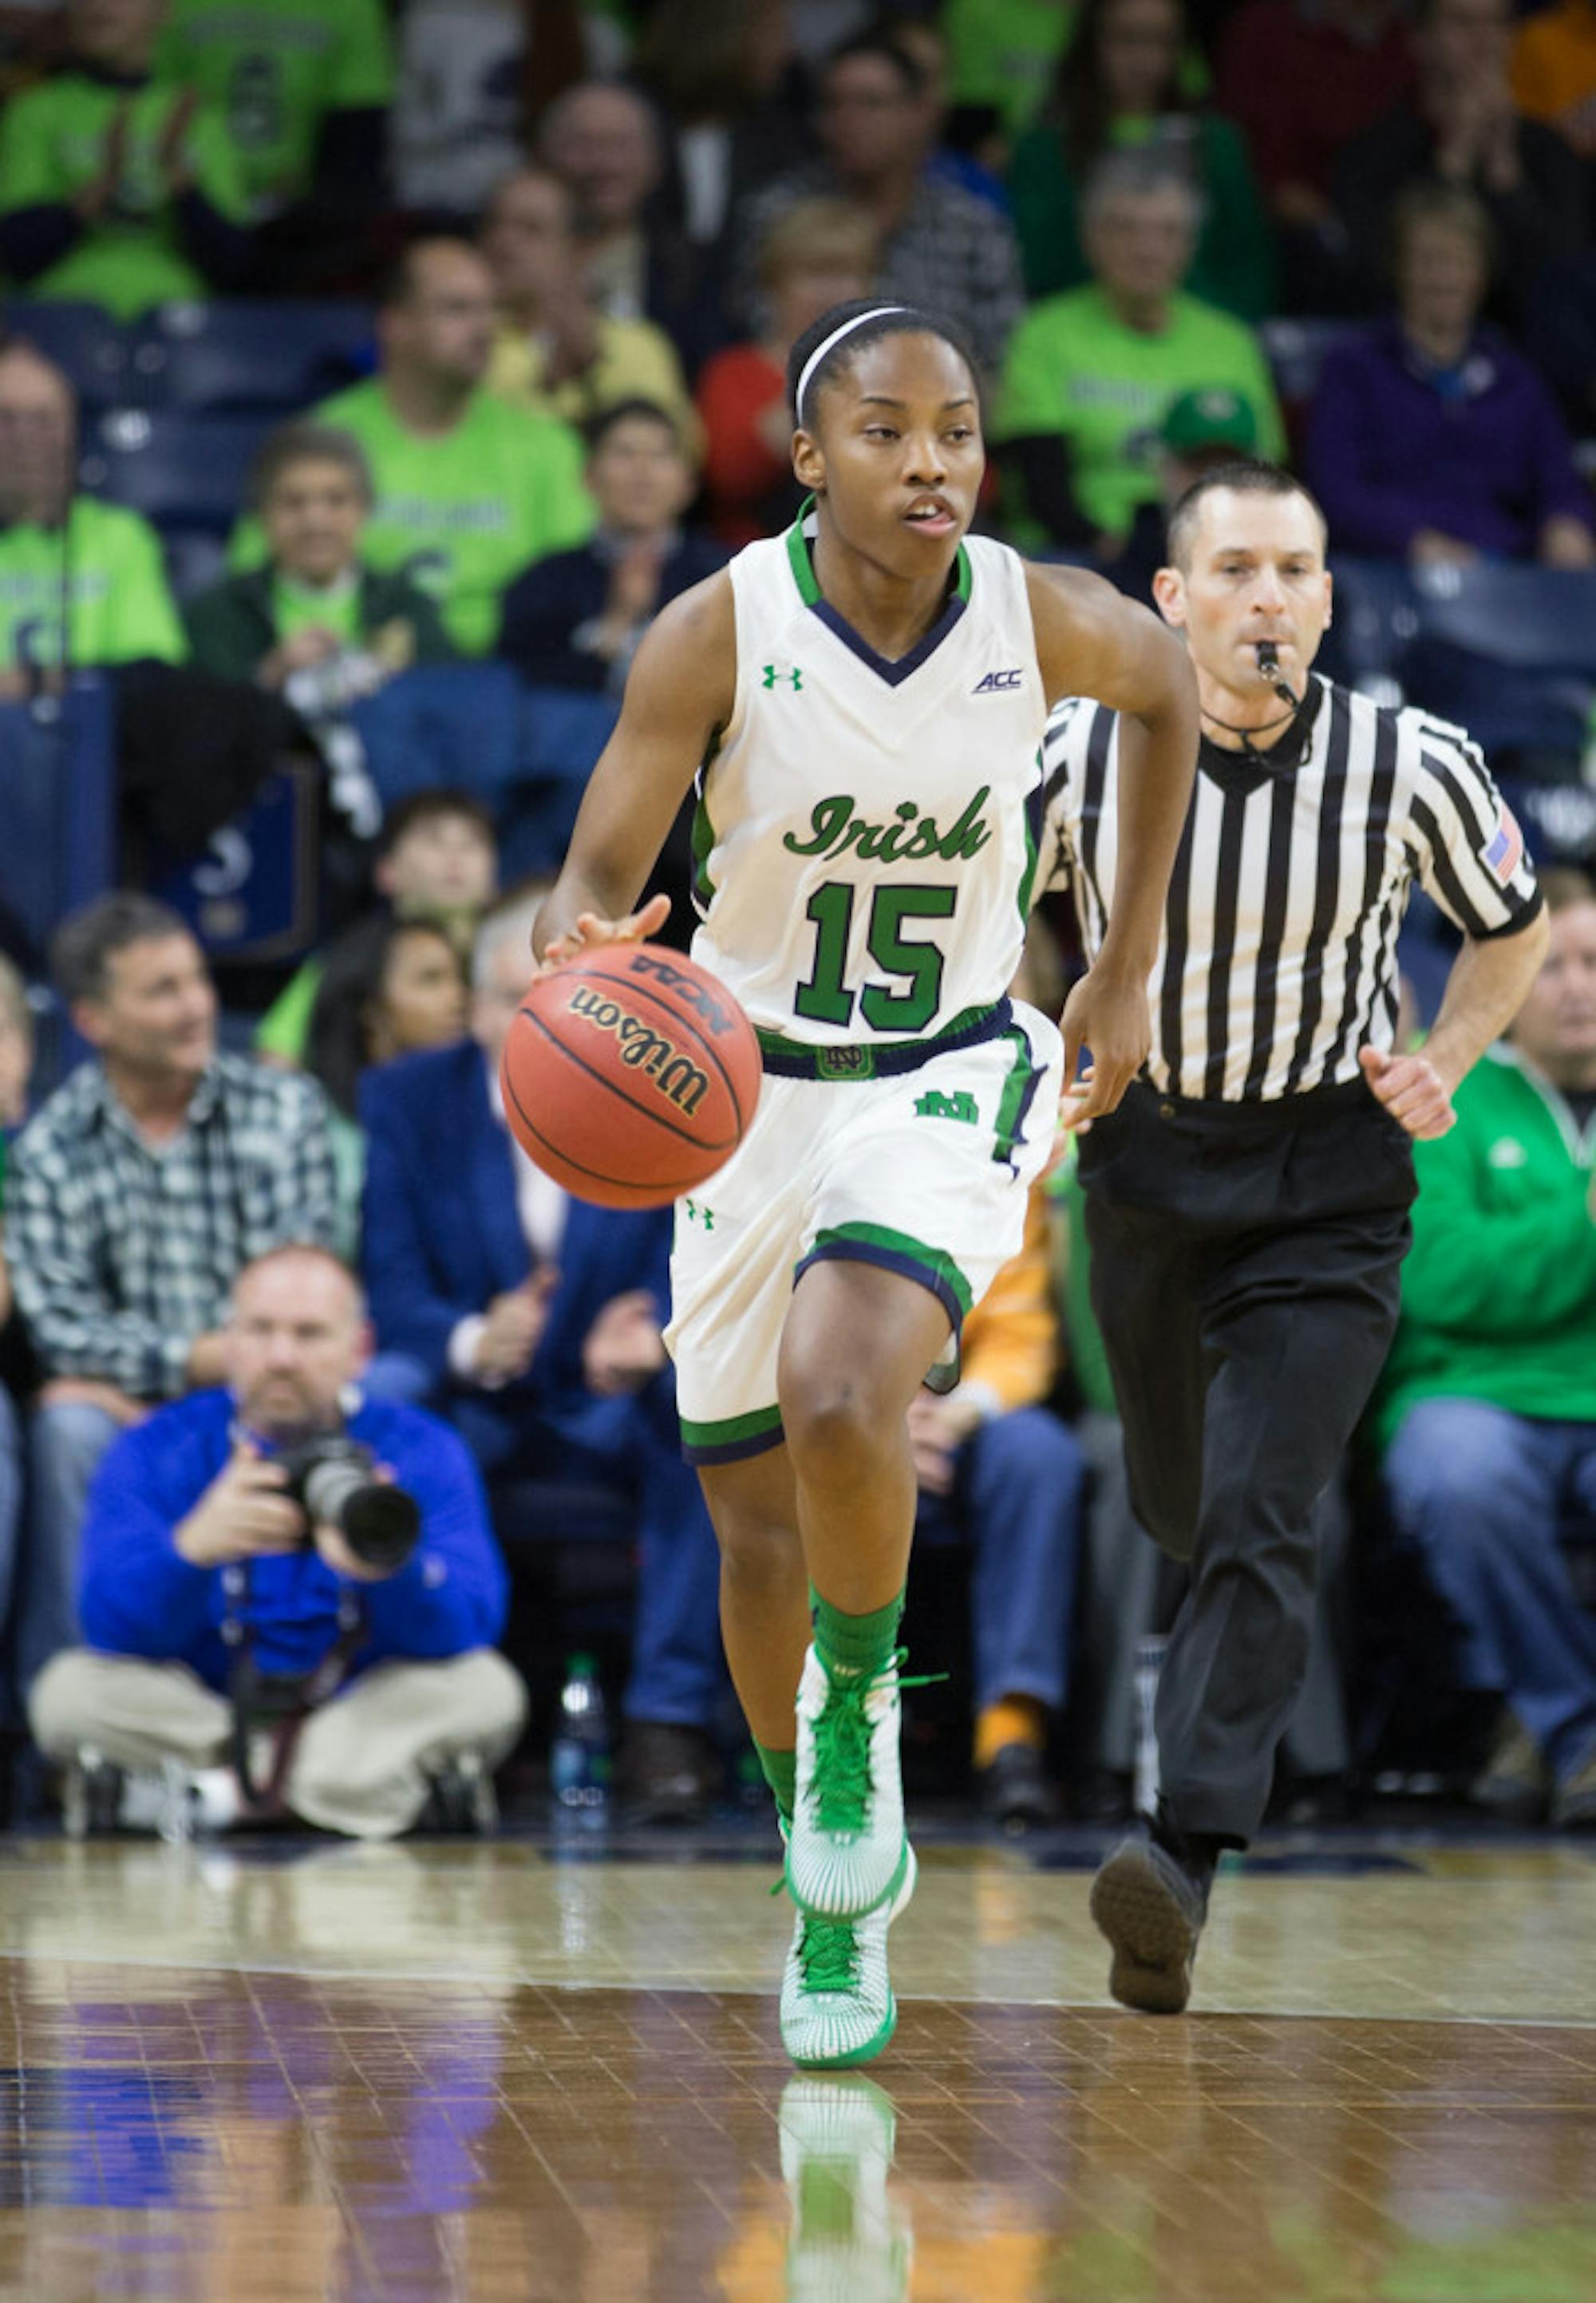 Irish sophomore guard Lindsay Allen brings the ball up the court during Notre Dame’s 88-77 win over Tennessee on Monday at Purcell Pavilion.